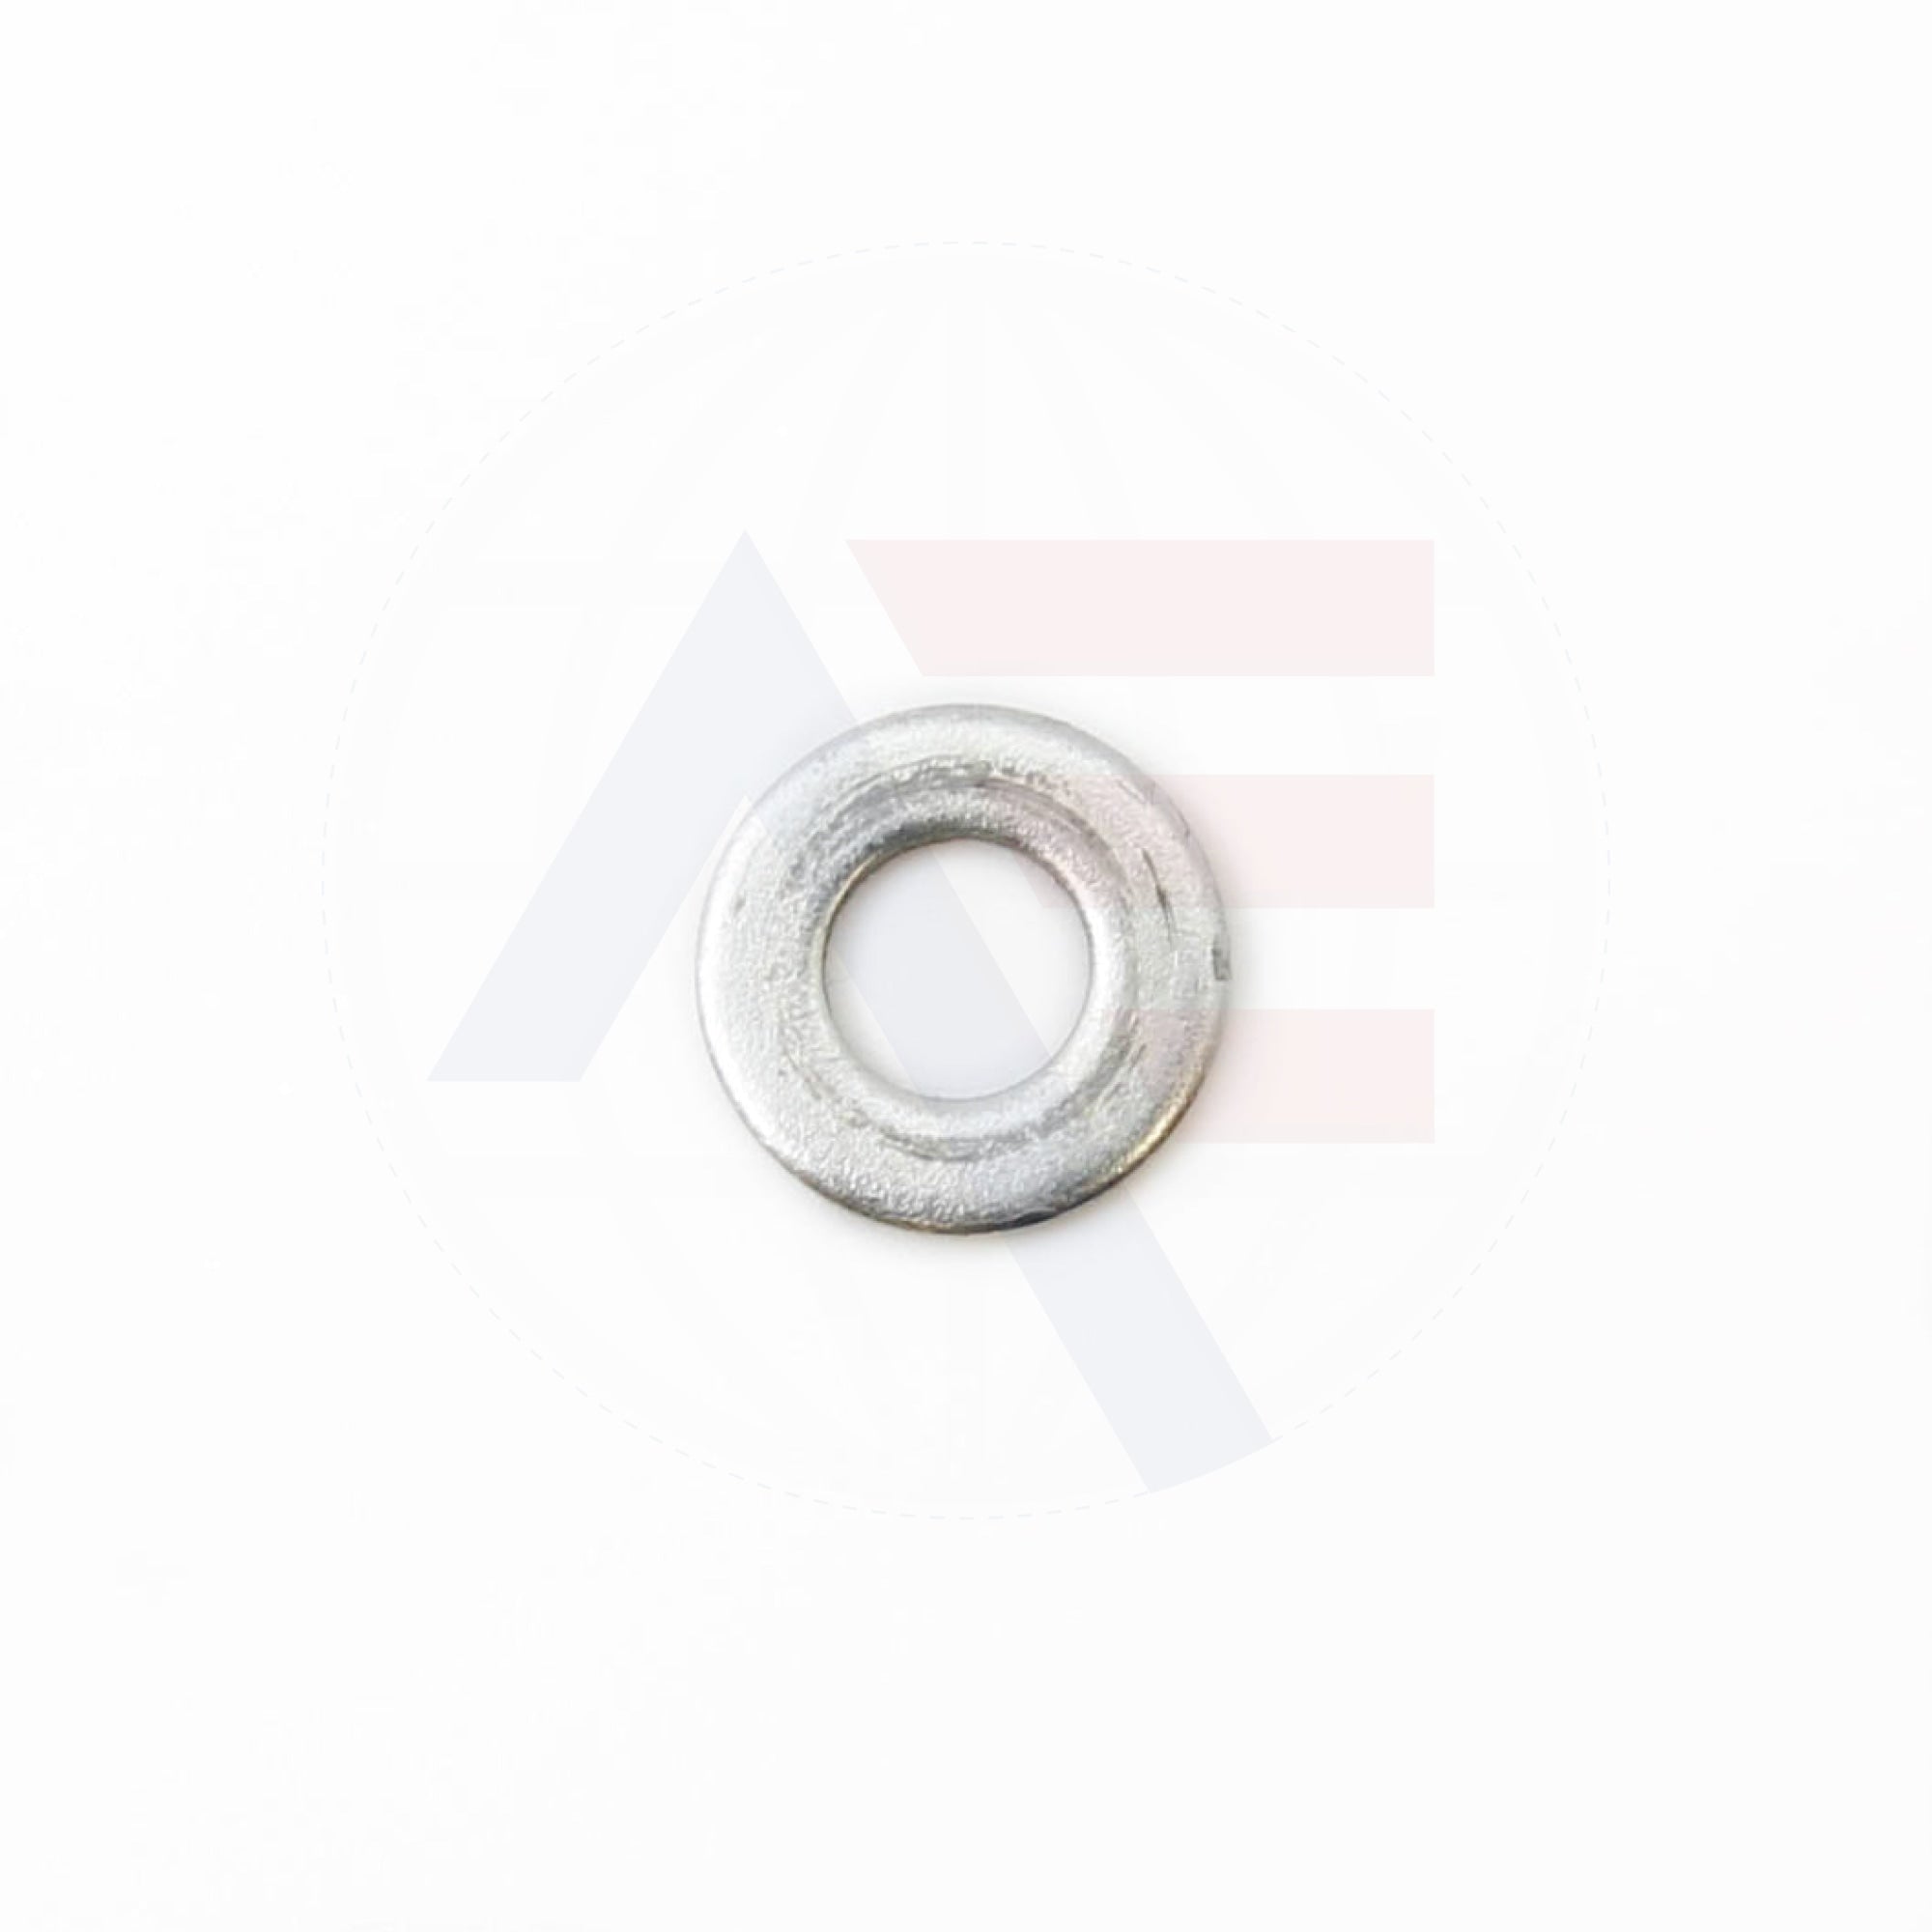 Dayang Rsd-100 S183 Knife Gear Washer Spring